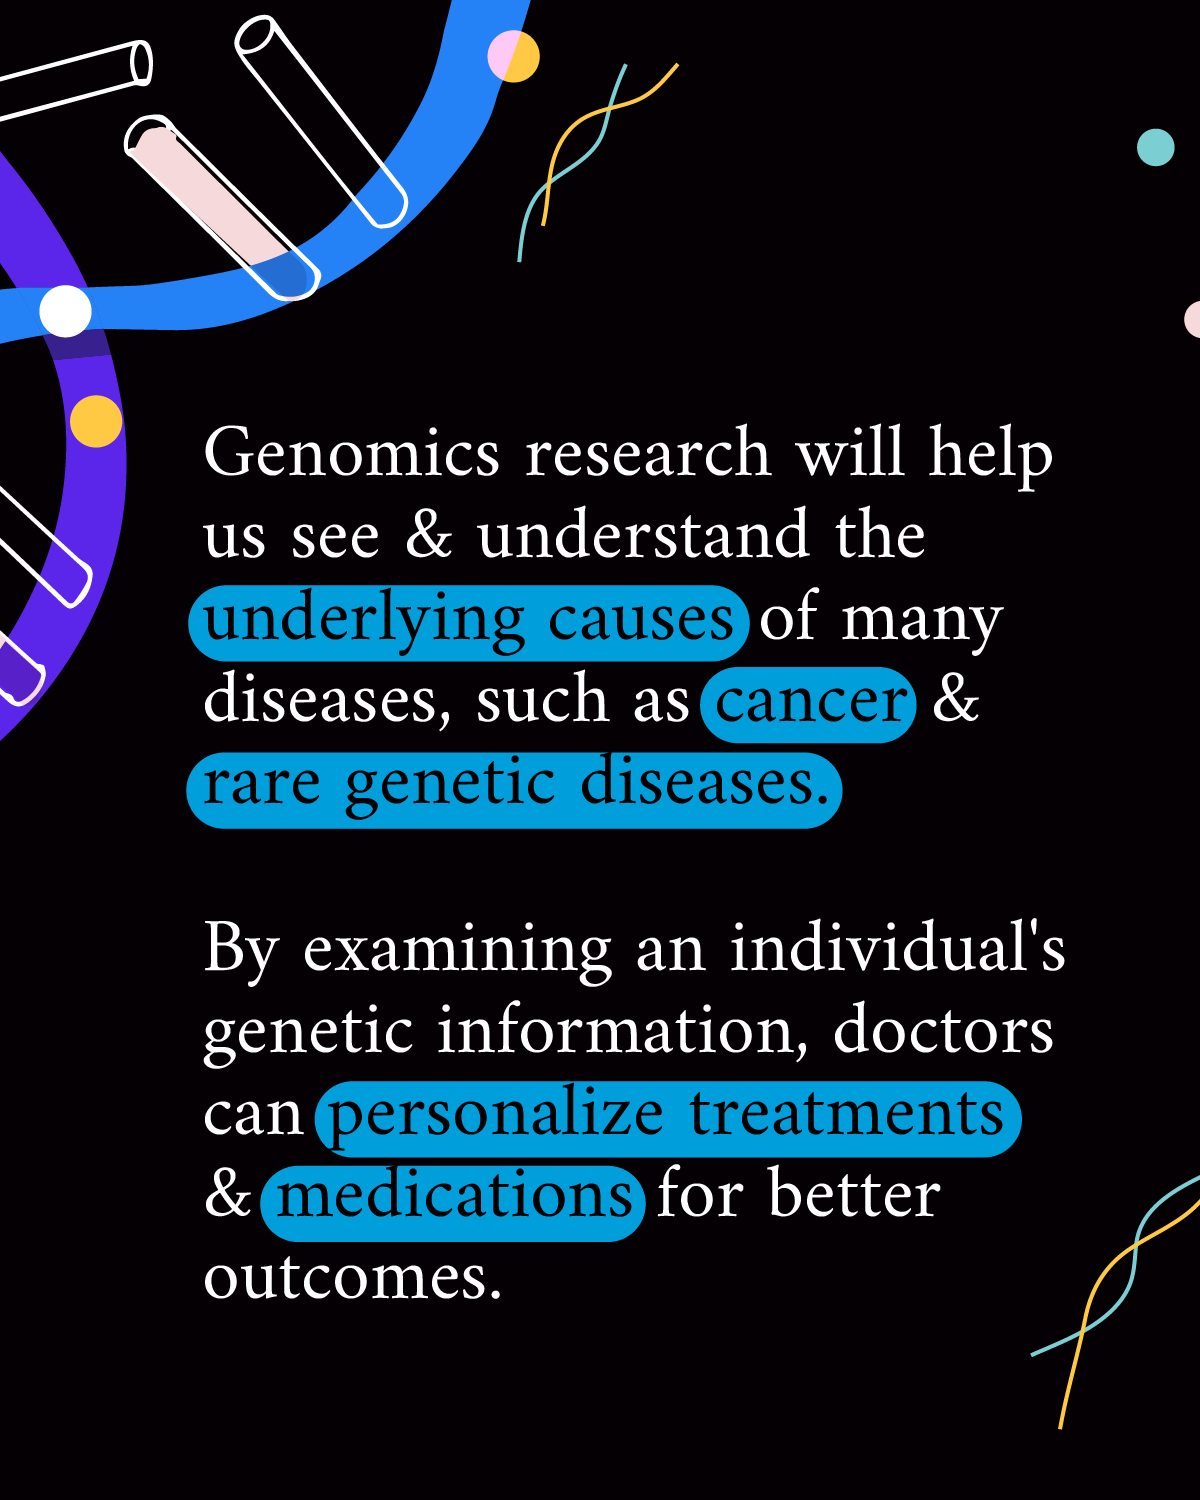 Infographic reads “Genomics research will help us see & understand the underlying causes of many diseases, such as cancer & rare genetic diseases. By examining an individual’s genetic information, doctors can personalize treatments & medications for better outcomes.” A strand of DNA — a blue, purple and gold double helix — is drawn to accompany the text.